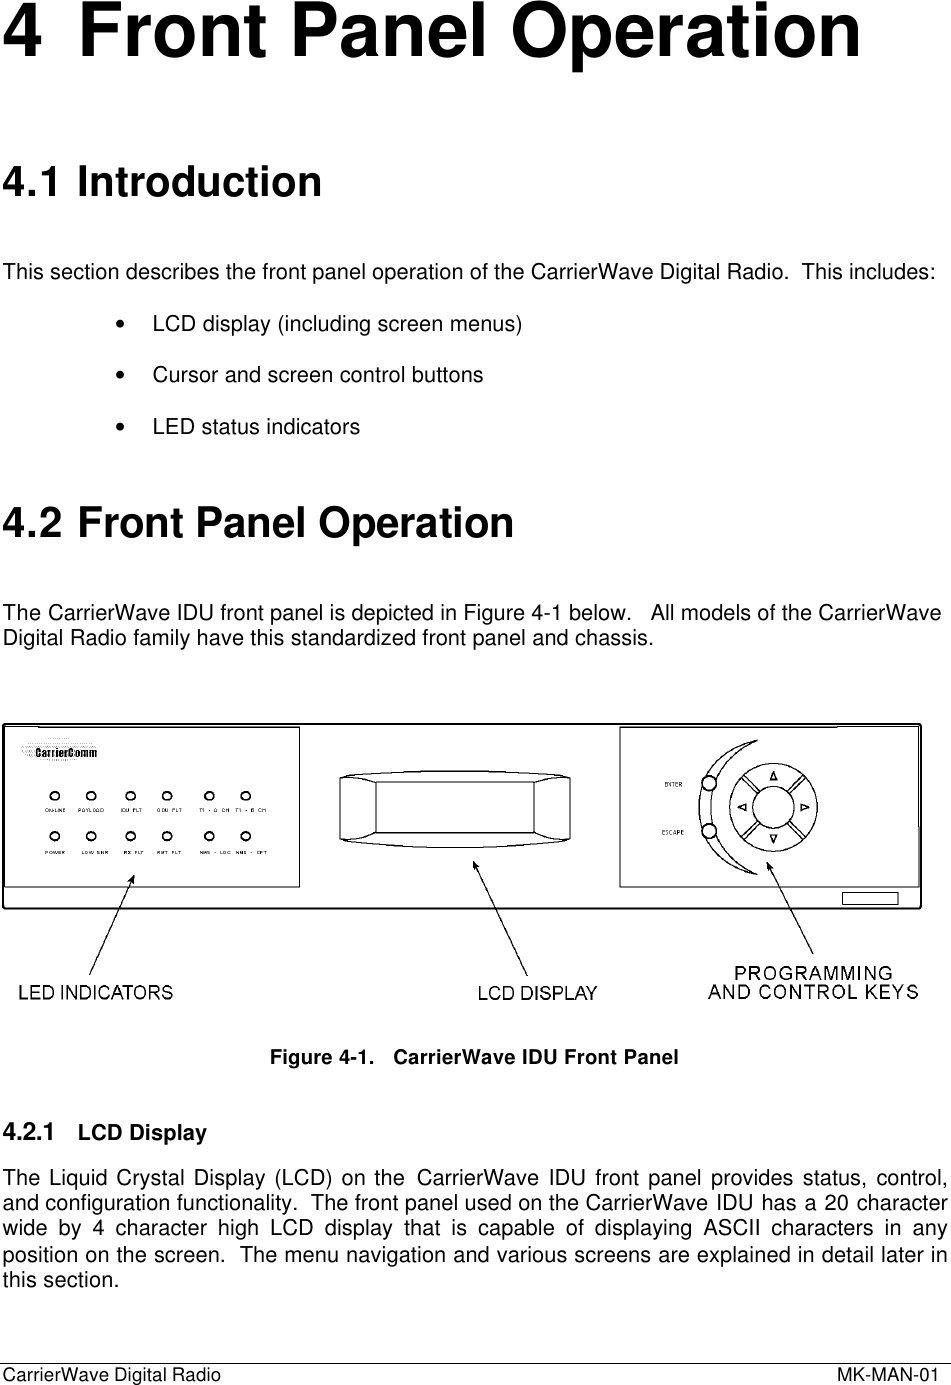 CarrierWave Digital Radio  MK-MAN-014 Front Panel Operation4.1 IntroductionThis section describes the front panel operation of the CarrierWave Digital Radio.  This includes:• LCD display (including screen menus)• Cursor and screen control buttons• LED status indicators4.2 Front Panel OperationThe CarrierWave IDU front panel is depicted in Figure 4-1 below.   All models of the CarrierWaveDigital Radio family have this standardized front panel and chassis.Figure 4-1.   CarrierWave IDU Front Panel4.2.1 LCD DisplayThe Liquid Crystal Display (LCD) on the CarrierWave IDU front panel provides status, control,and configuration functionality.  The front panel used on the CarrierWave IDU has a 20 characterwide by 4 character high LCD display that is capable of displaying ASCII characters in anyposition on the screen.  The menu navigation and various screens are explained in detail later inthis section.